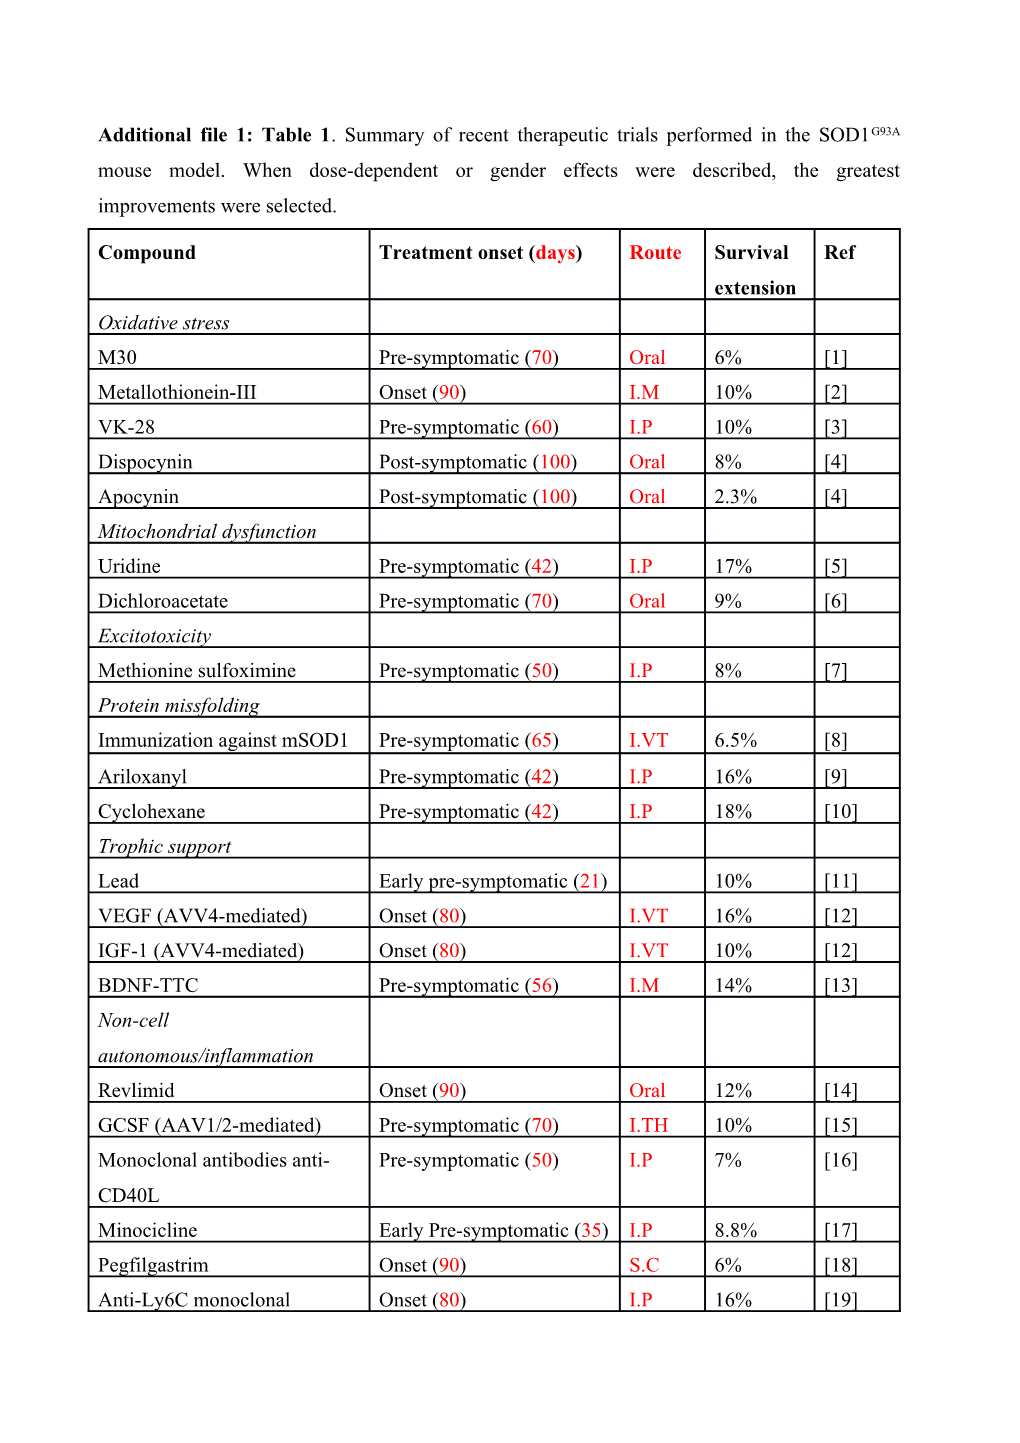 Additional File 1:Table 1 . Summary of Recent Therapeutic Trials Performed in the SOD1G93A